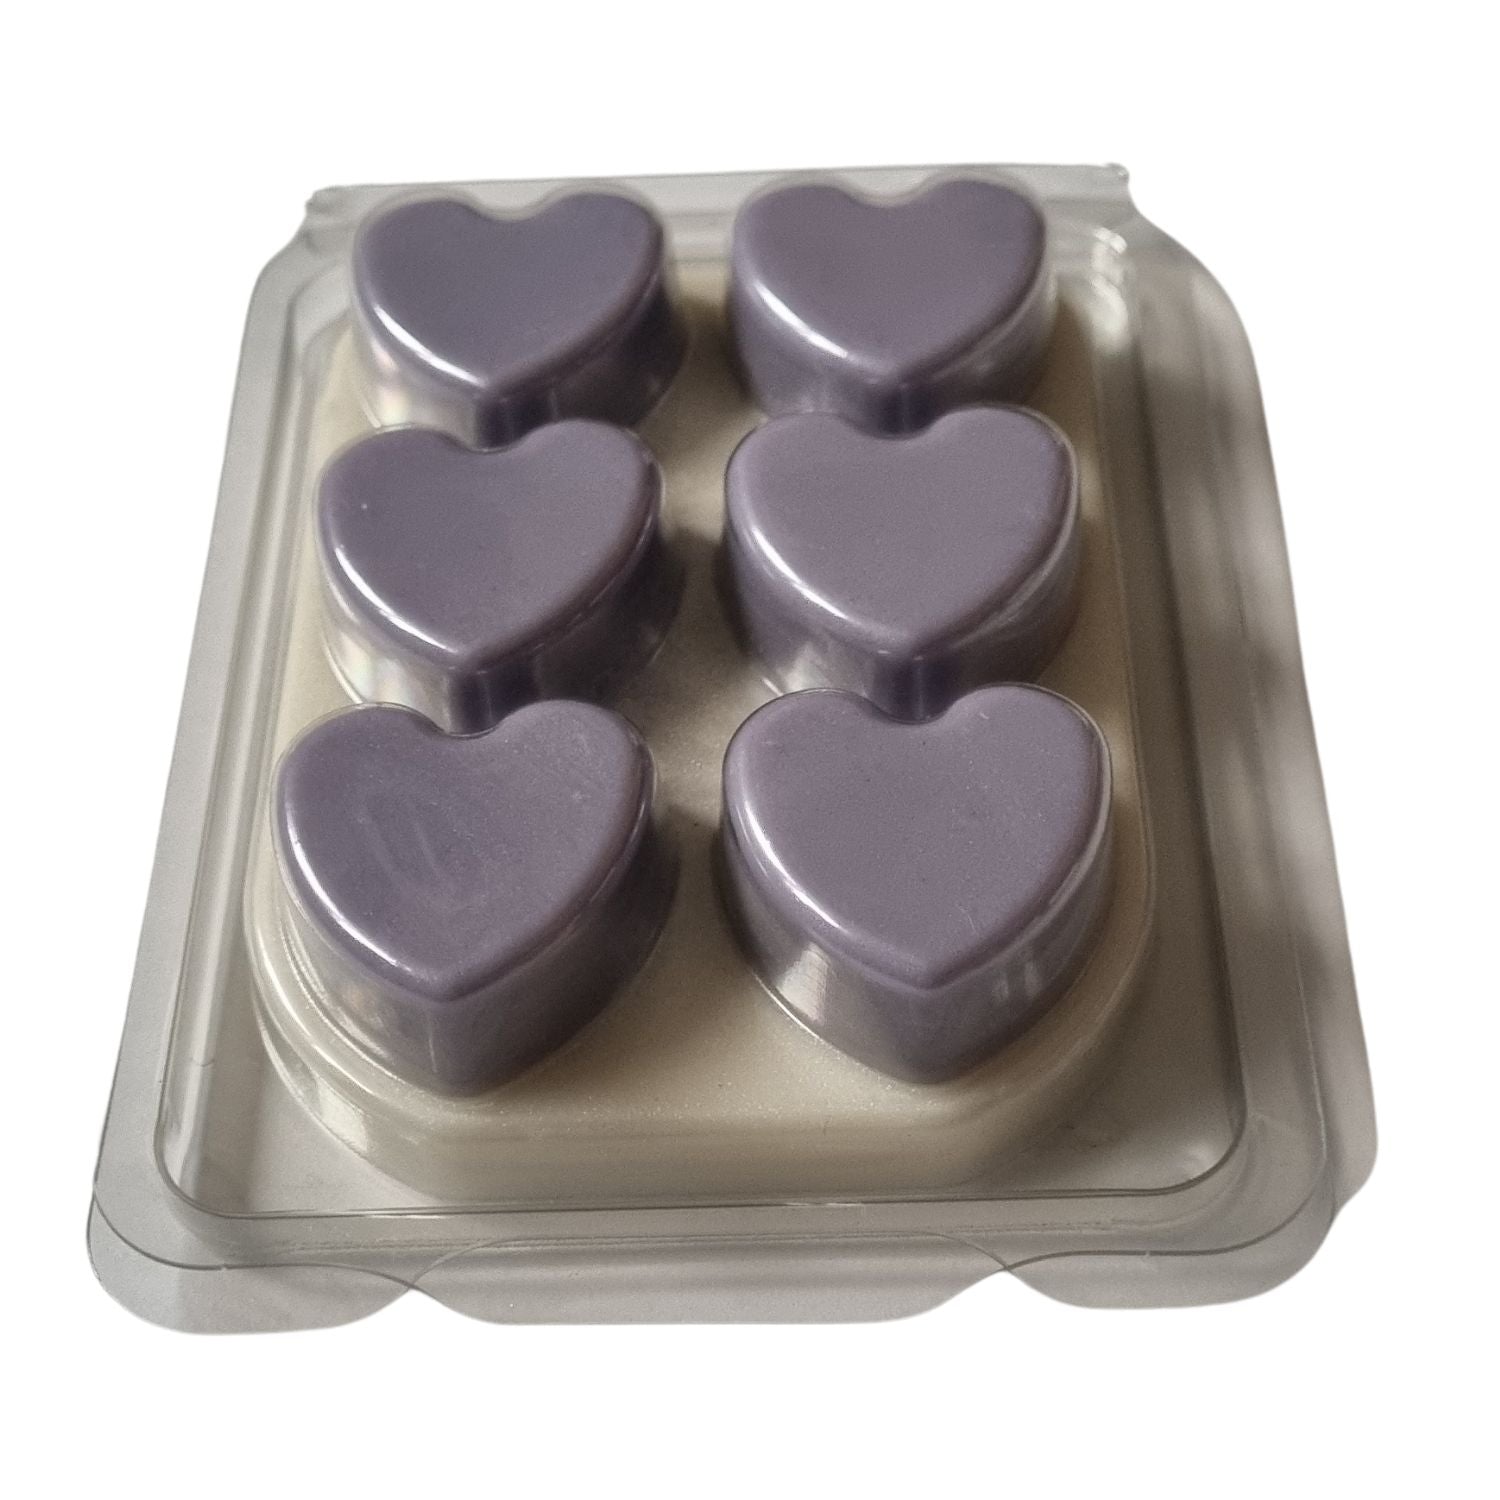 Scented Soy Wax Melts in hearts Clamshell with 6 violet Hearts on white wax melt background